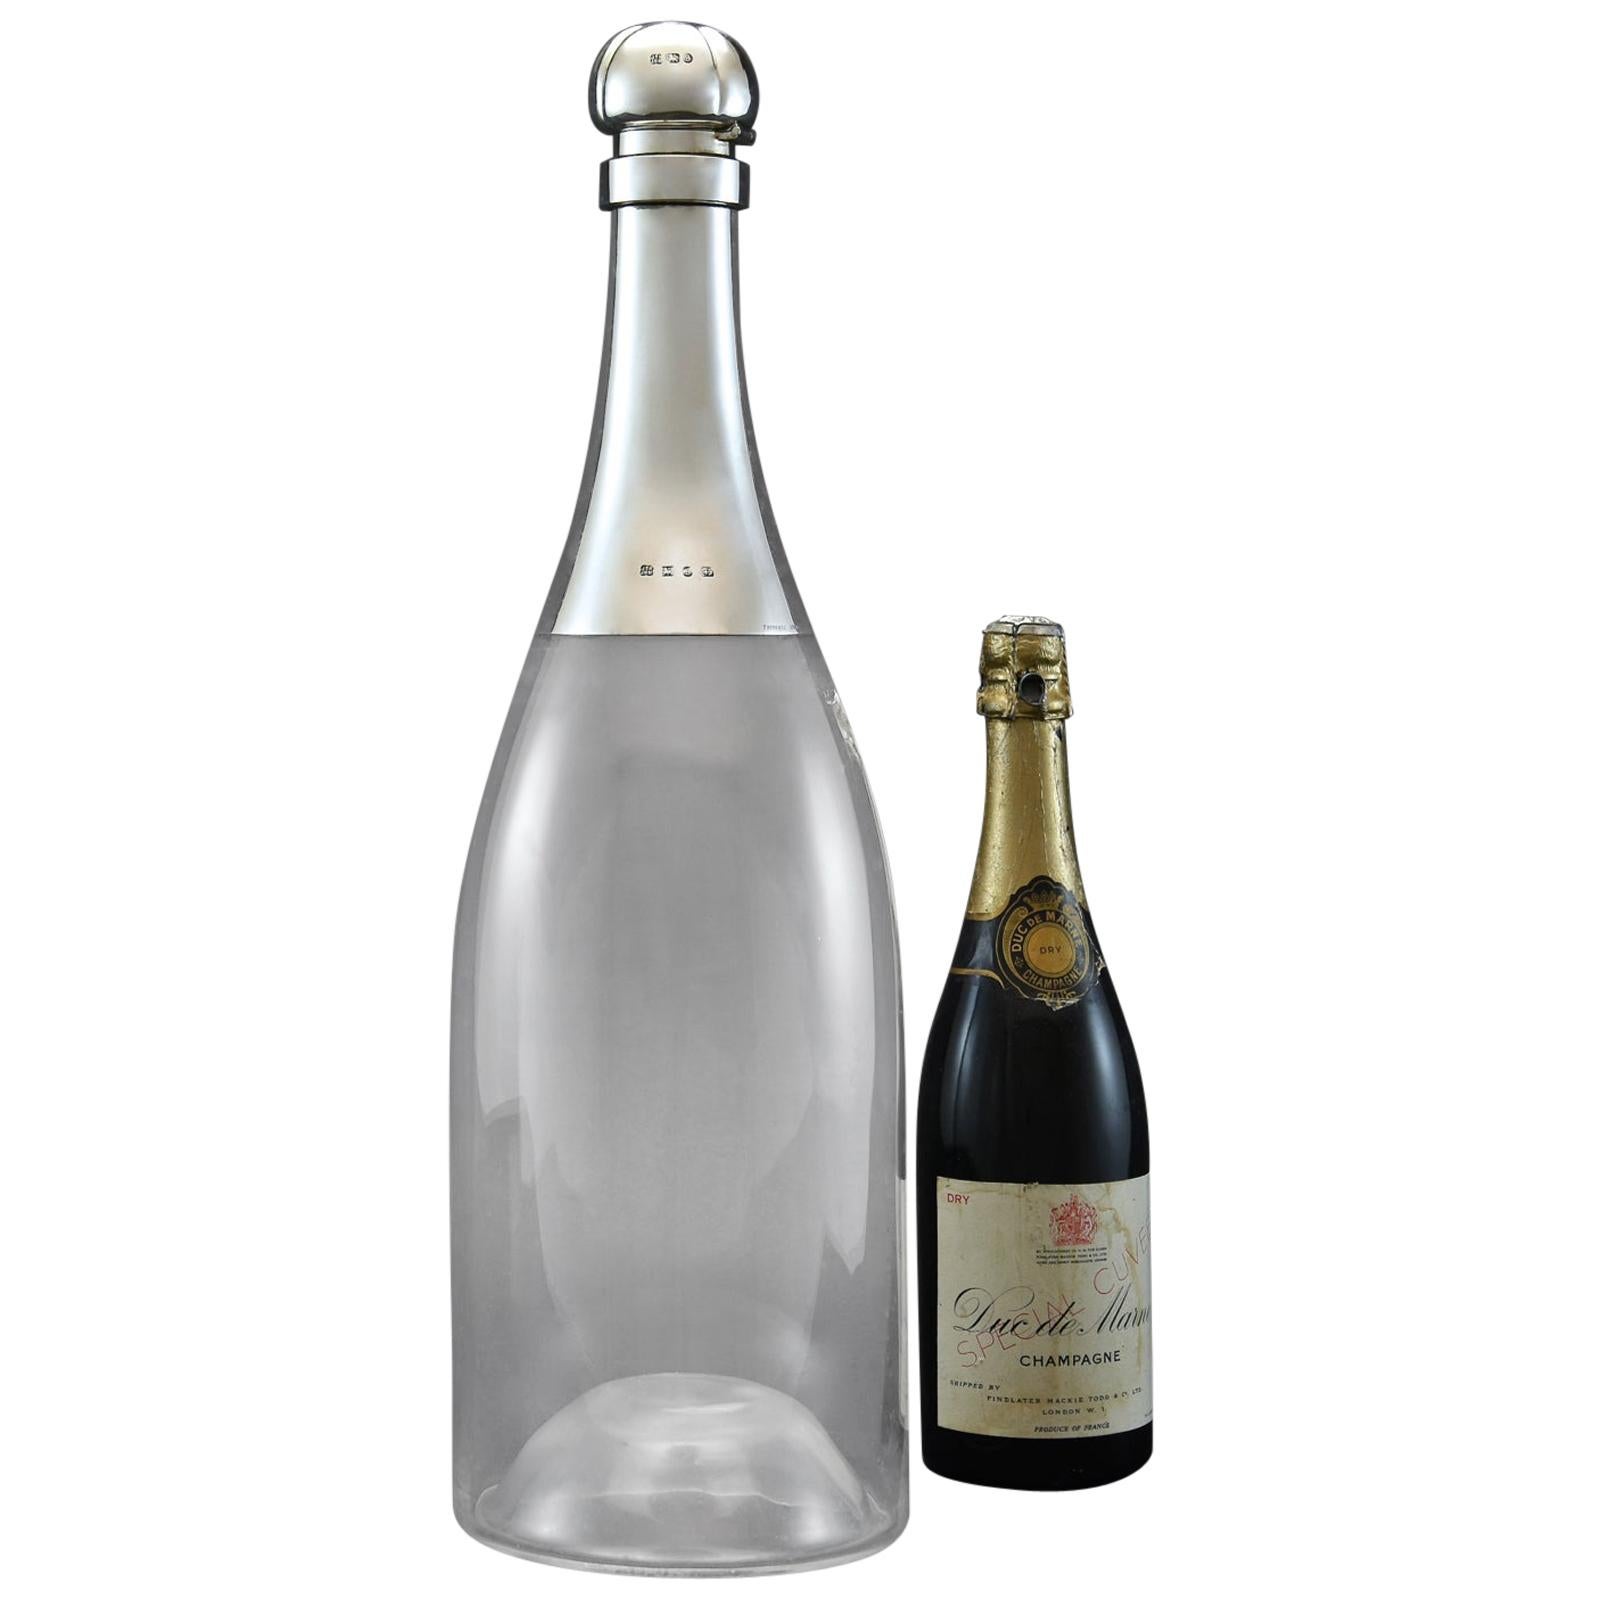 Giant Champagne Bottle Decanter with Sterling Silver Top, Hallmarked, 1892